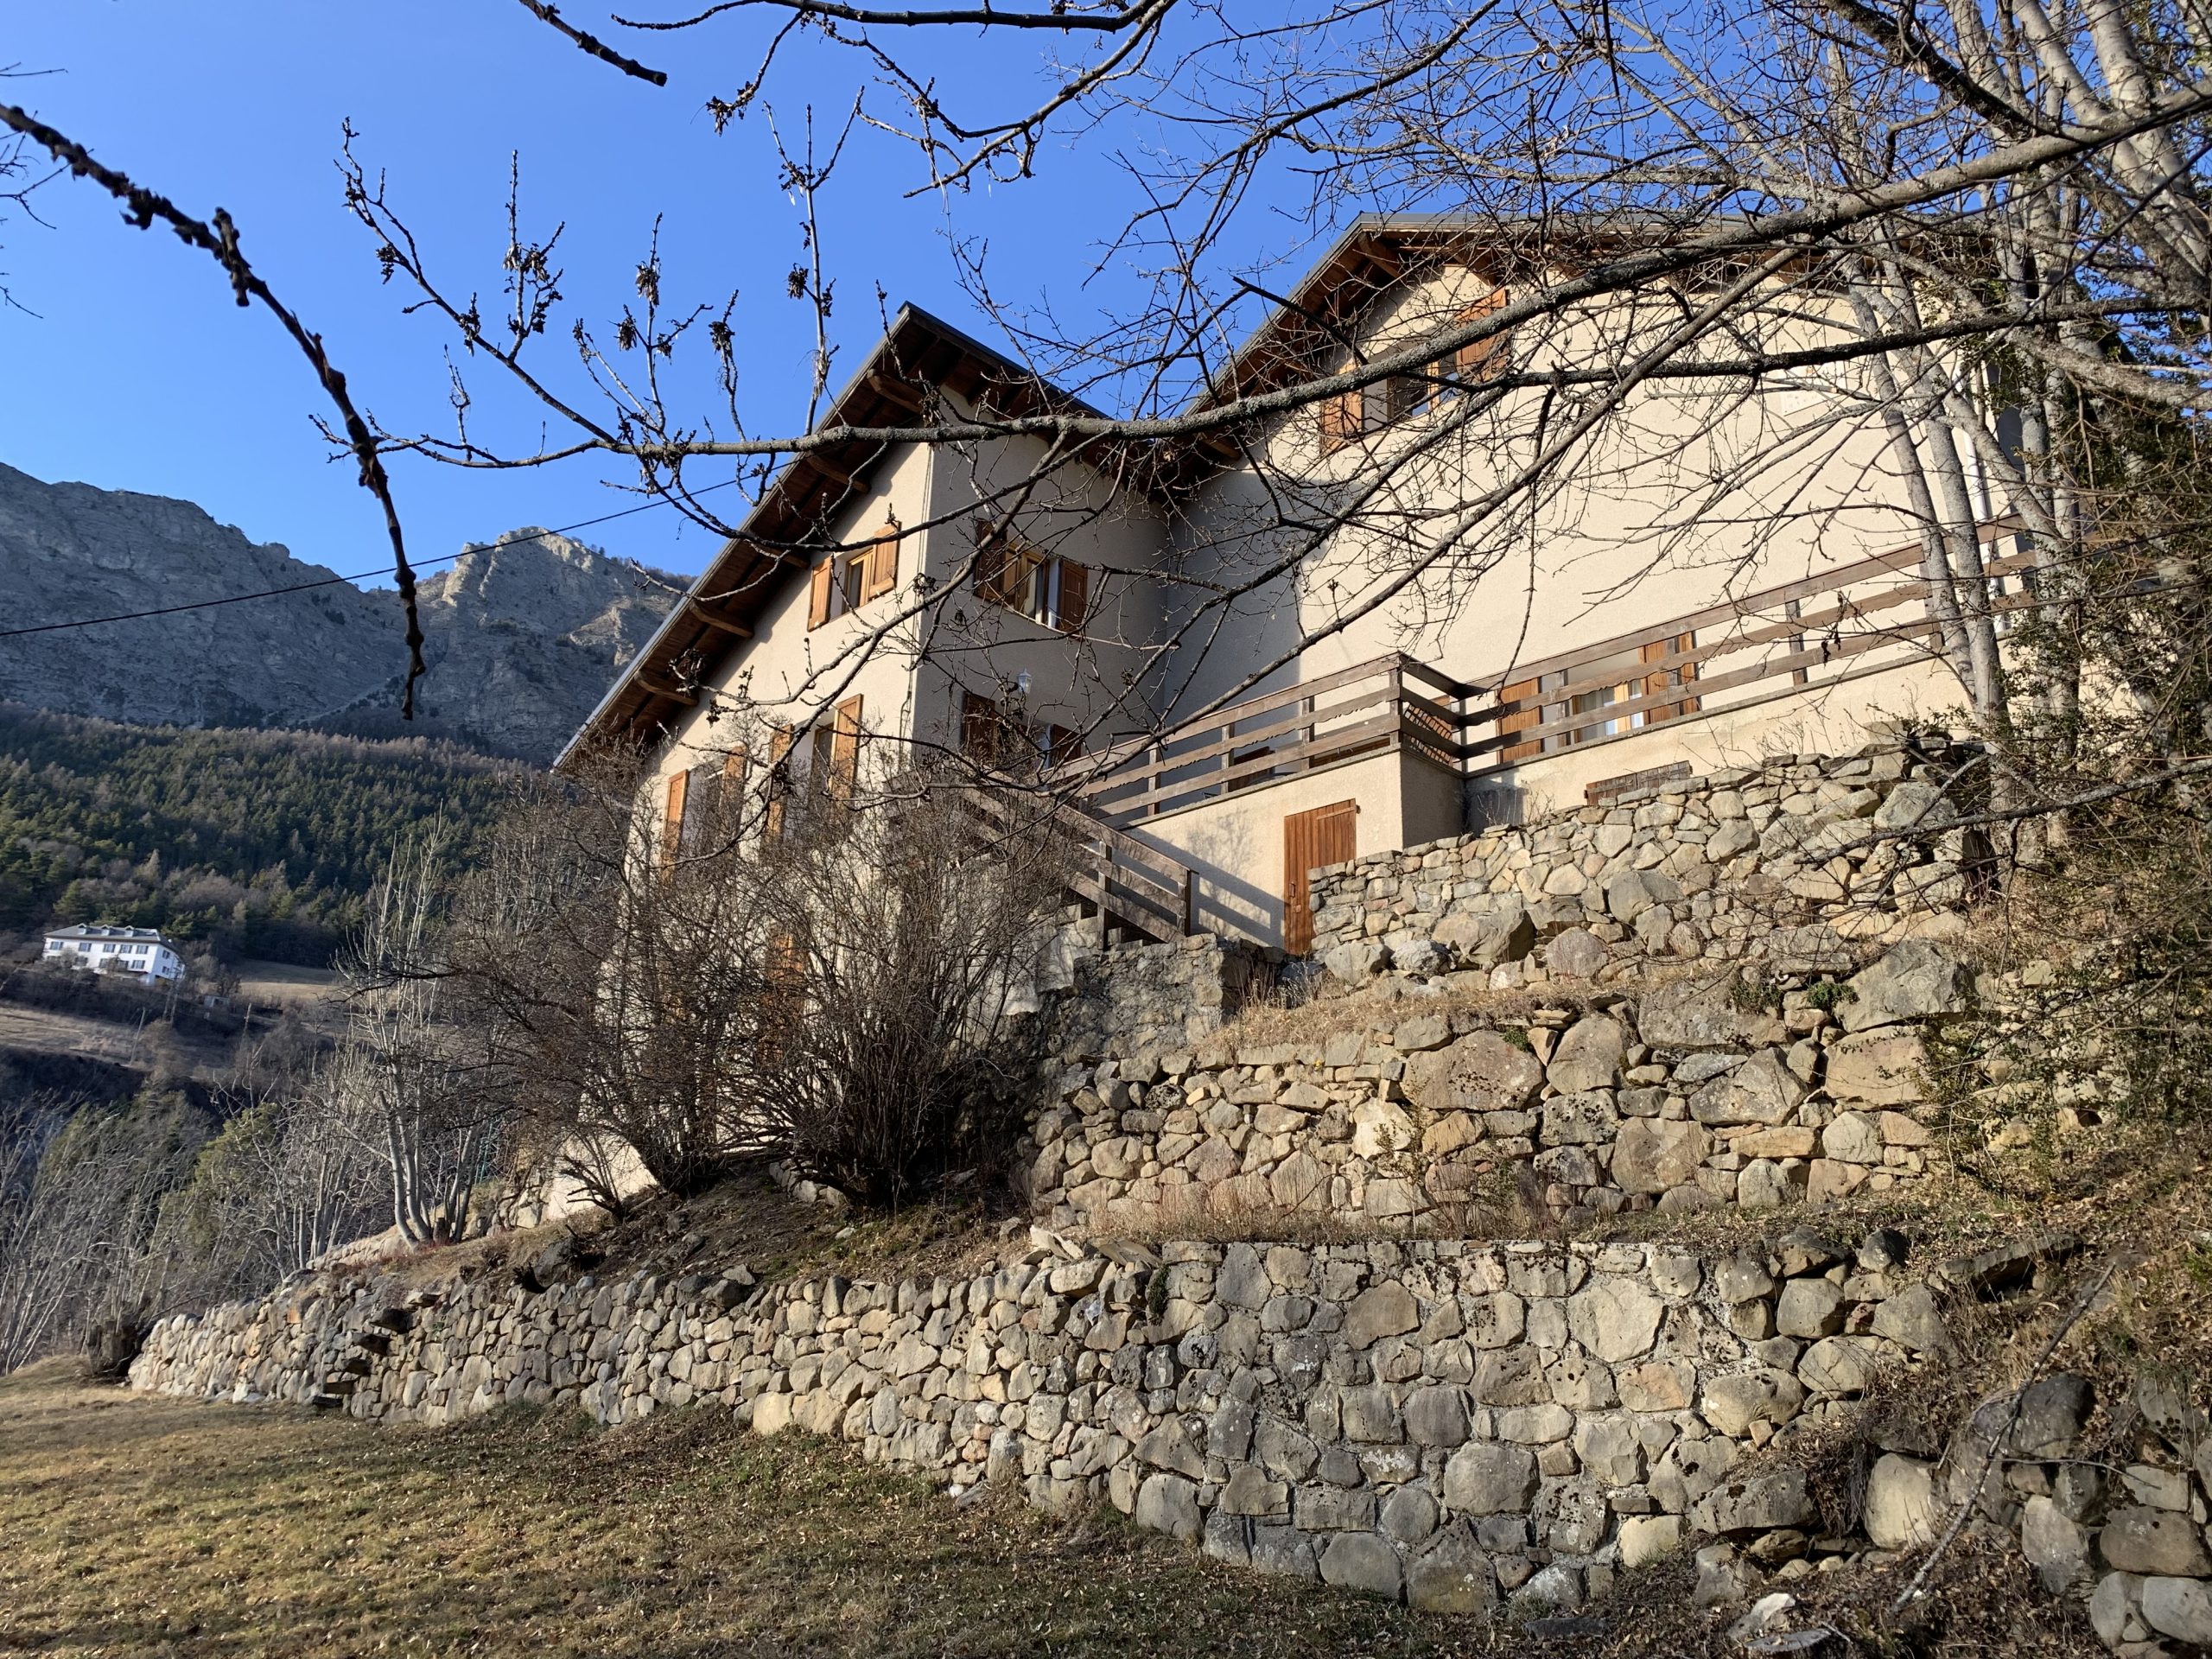 Colmars les Alpes – House 7 Bedrooms 250 sqm with Land 8600 sqm and Outbuildings.